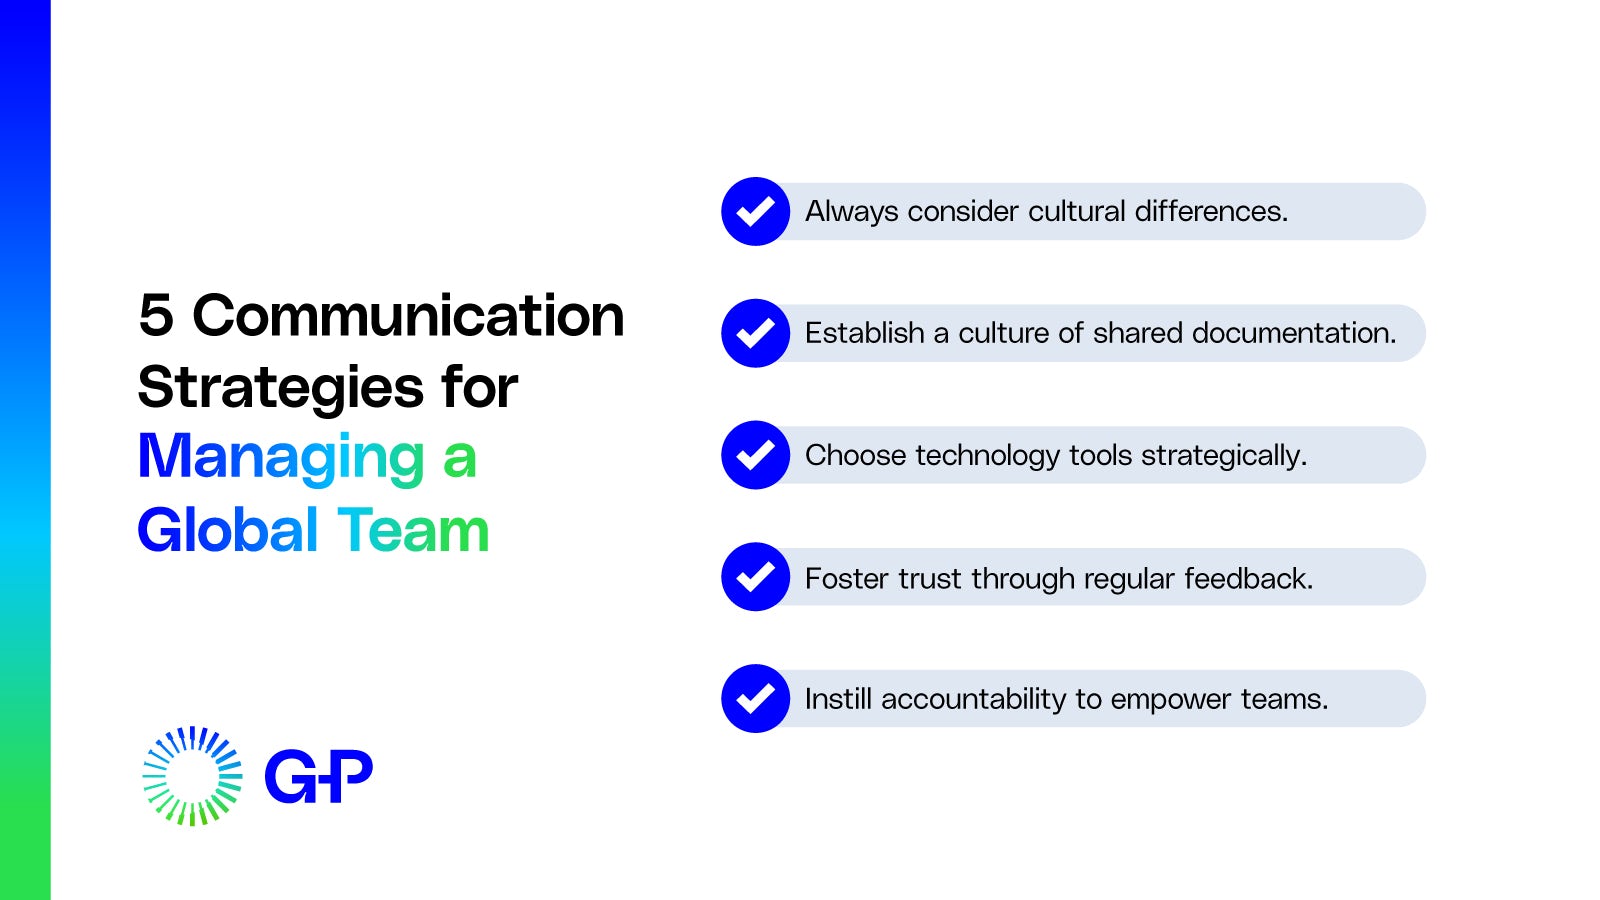 Checklist of 5 communication strategies for managing a global team.